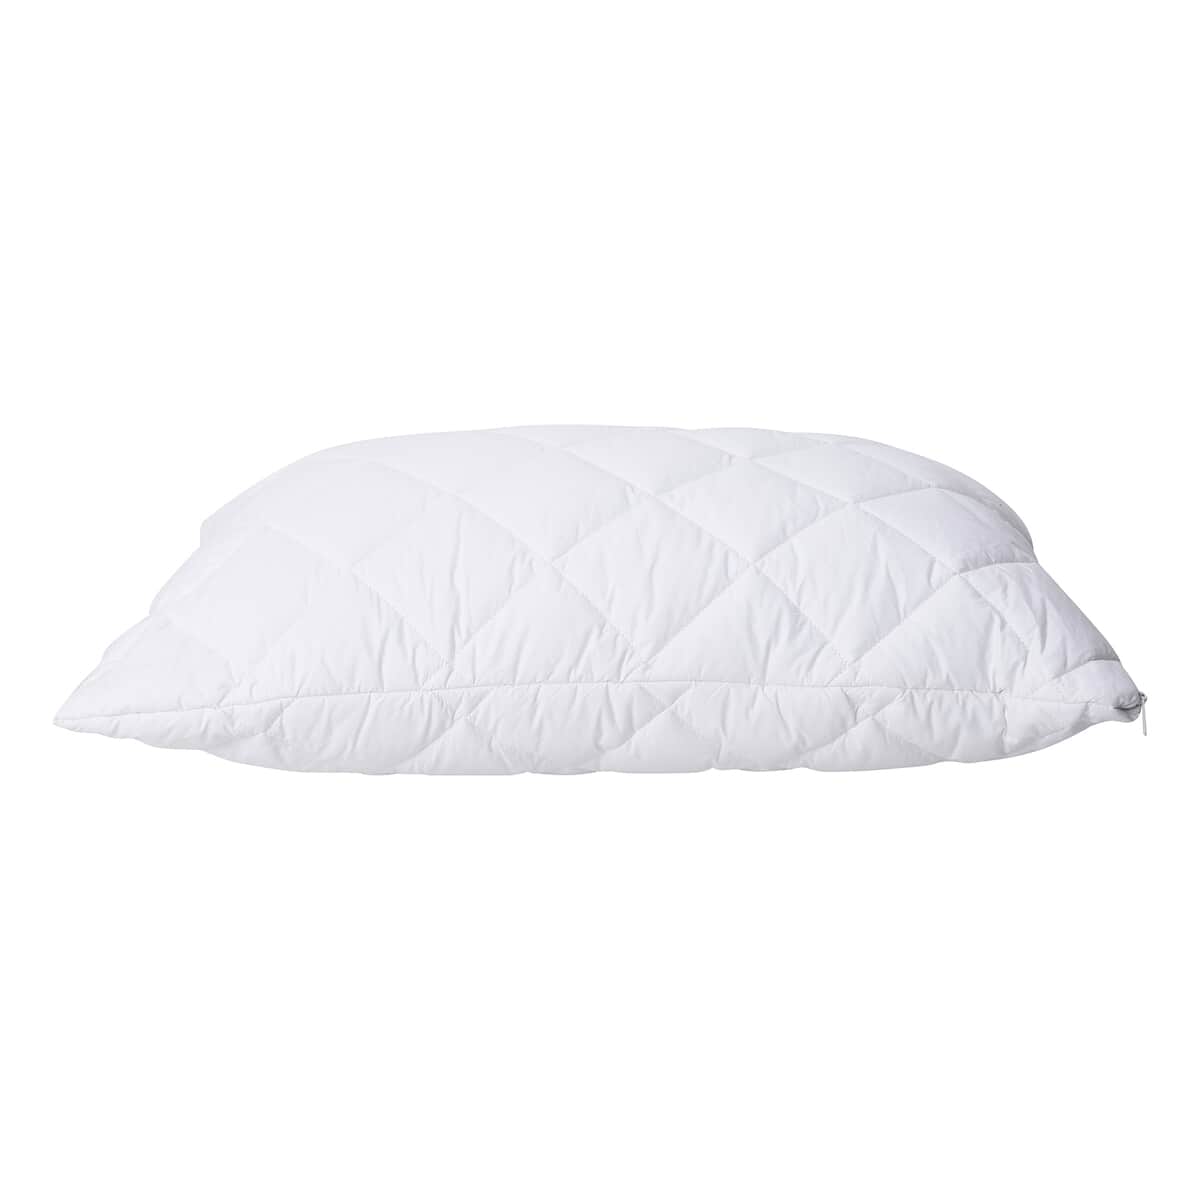 HOMESMART White Microfiber Quilted Magnet Pillow with Removable Cotton Cover - Full (Standard) image number 1